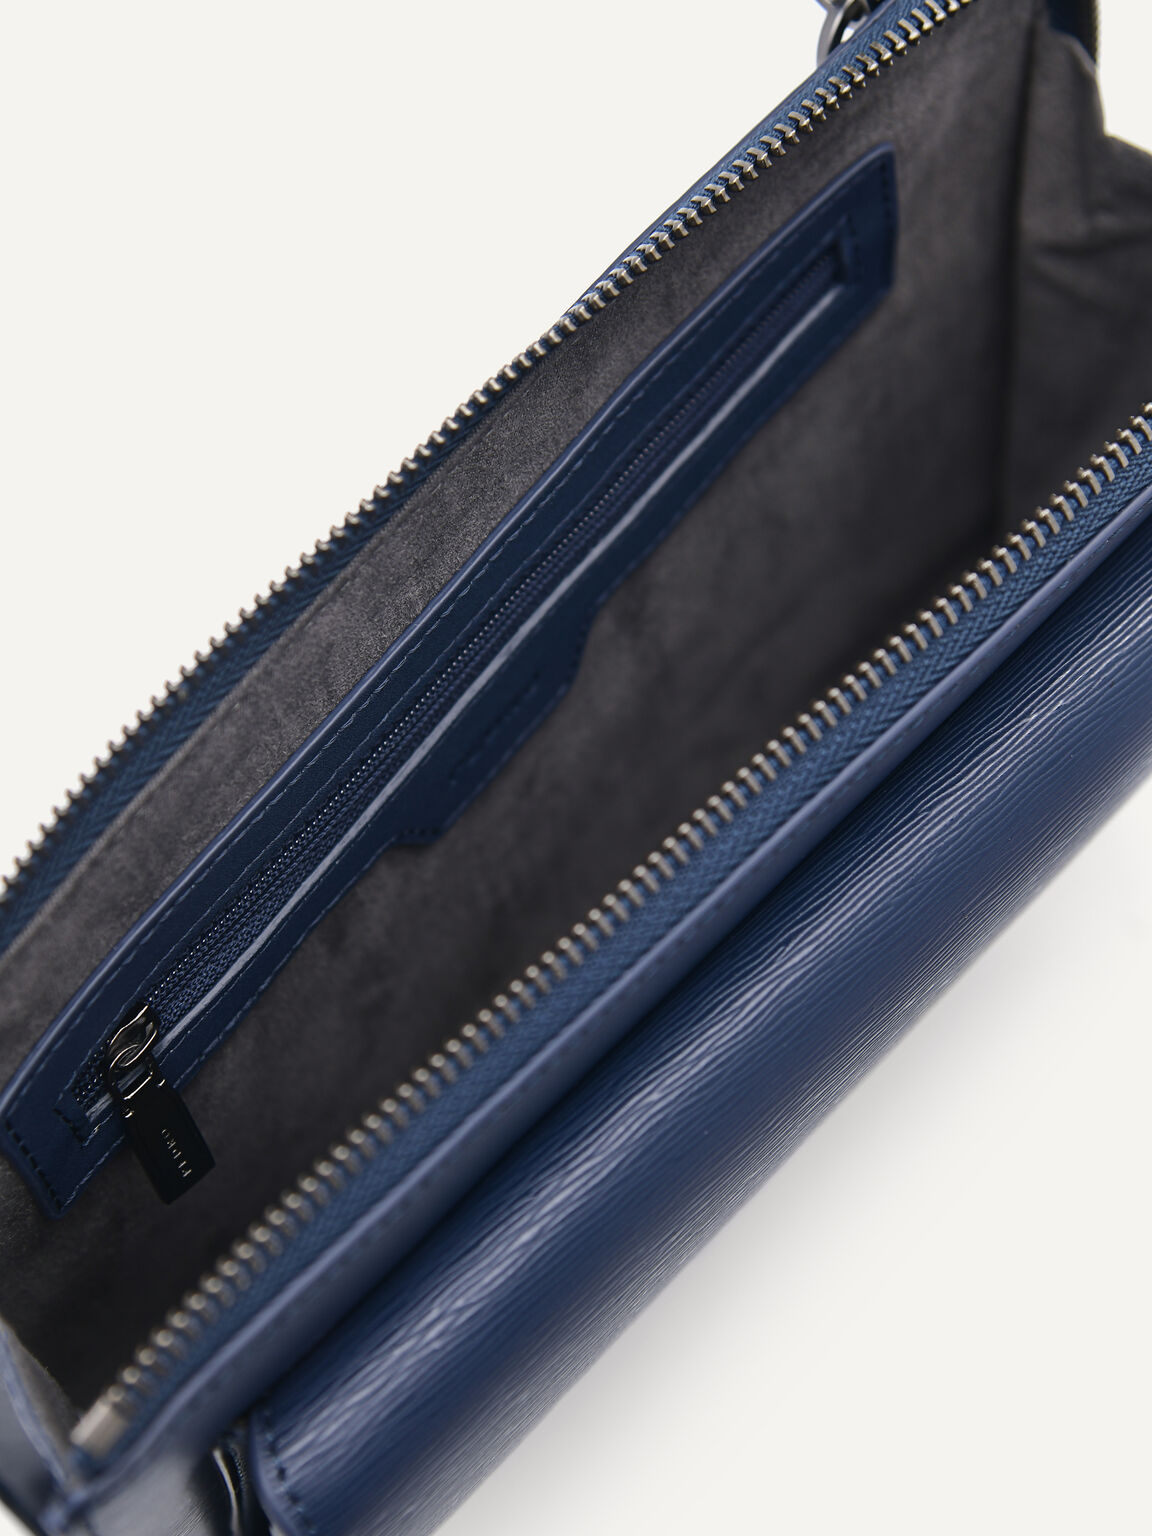 Henry Leather Clutch Bag, Navy